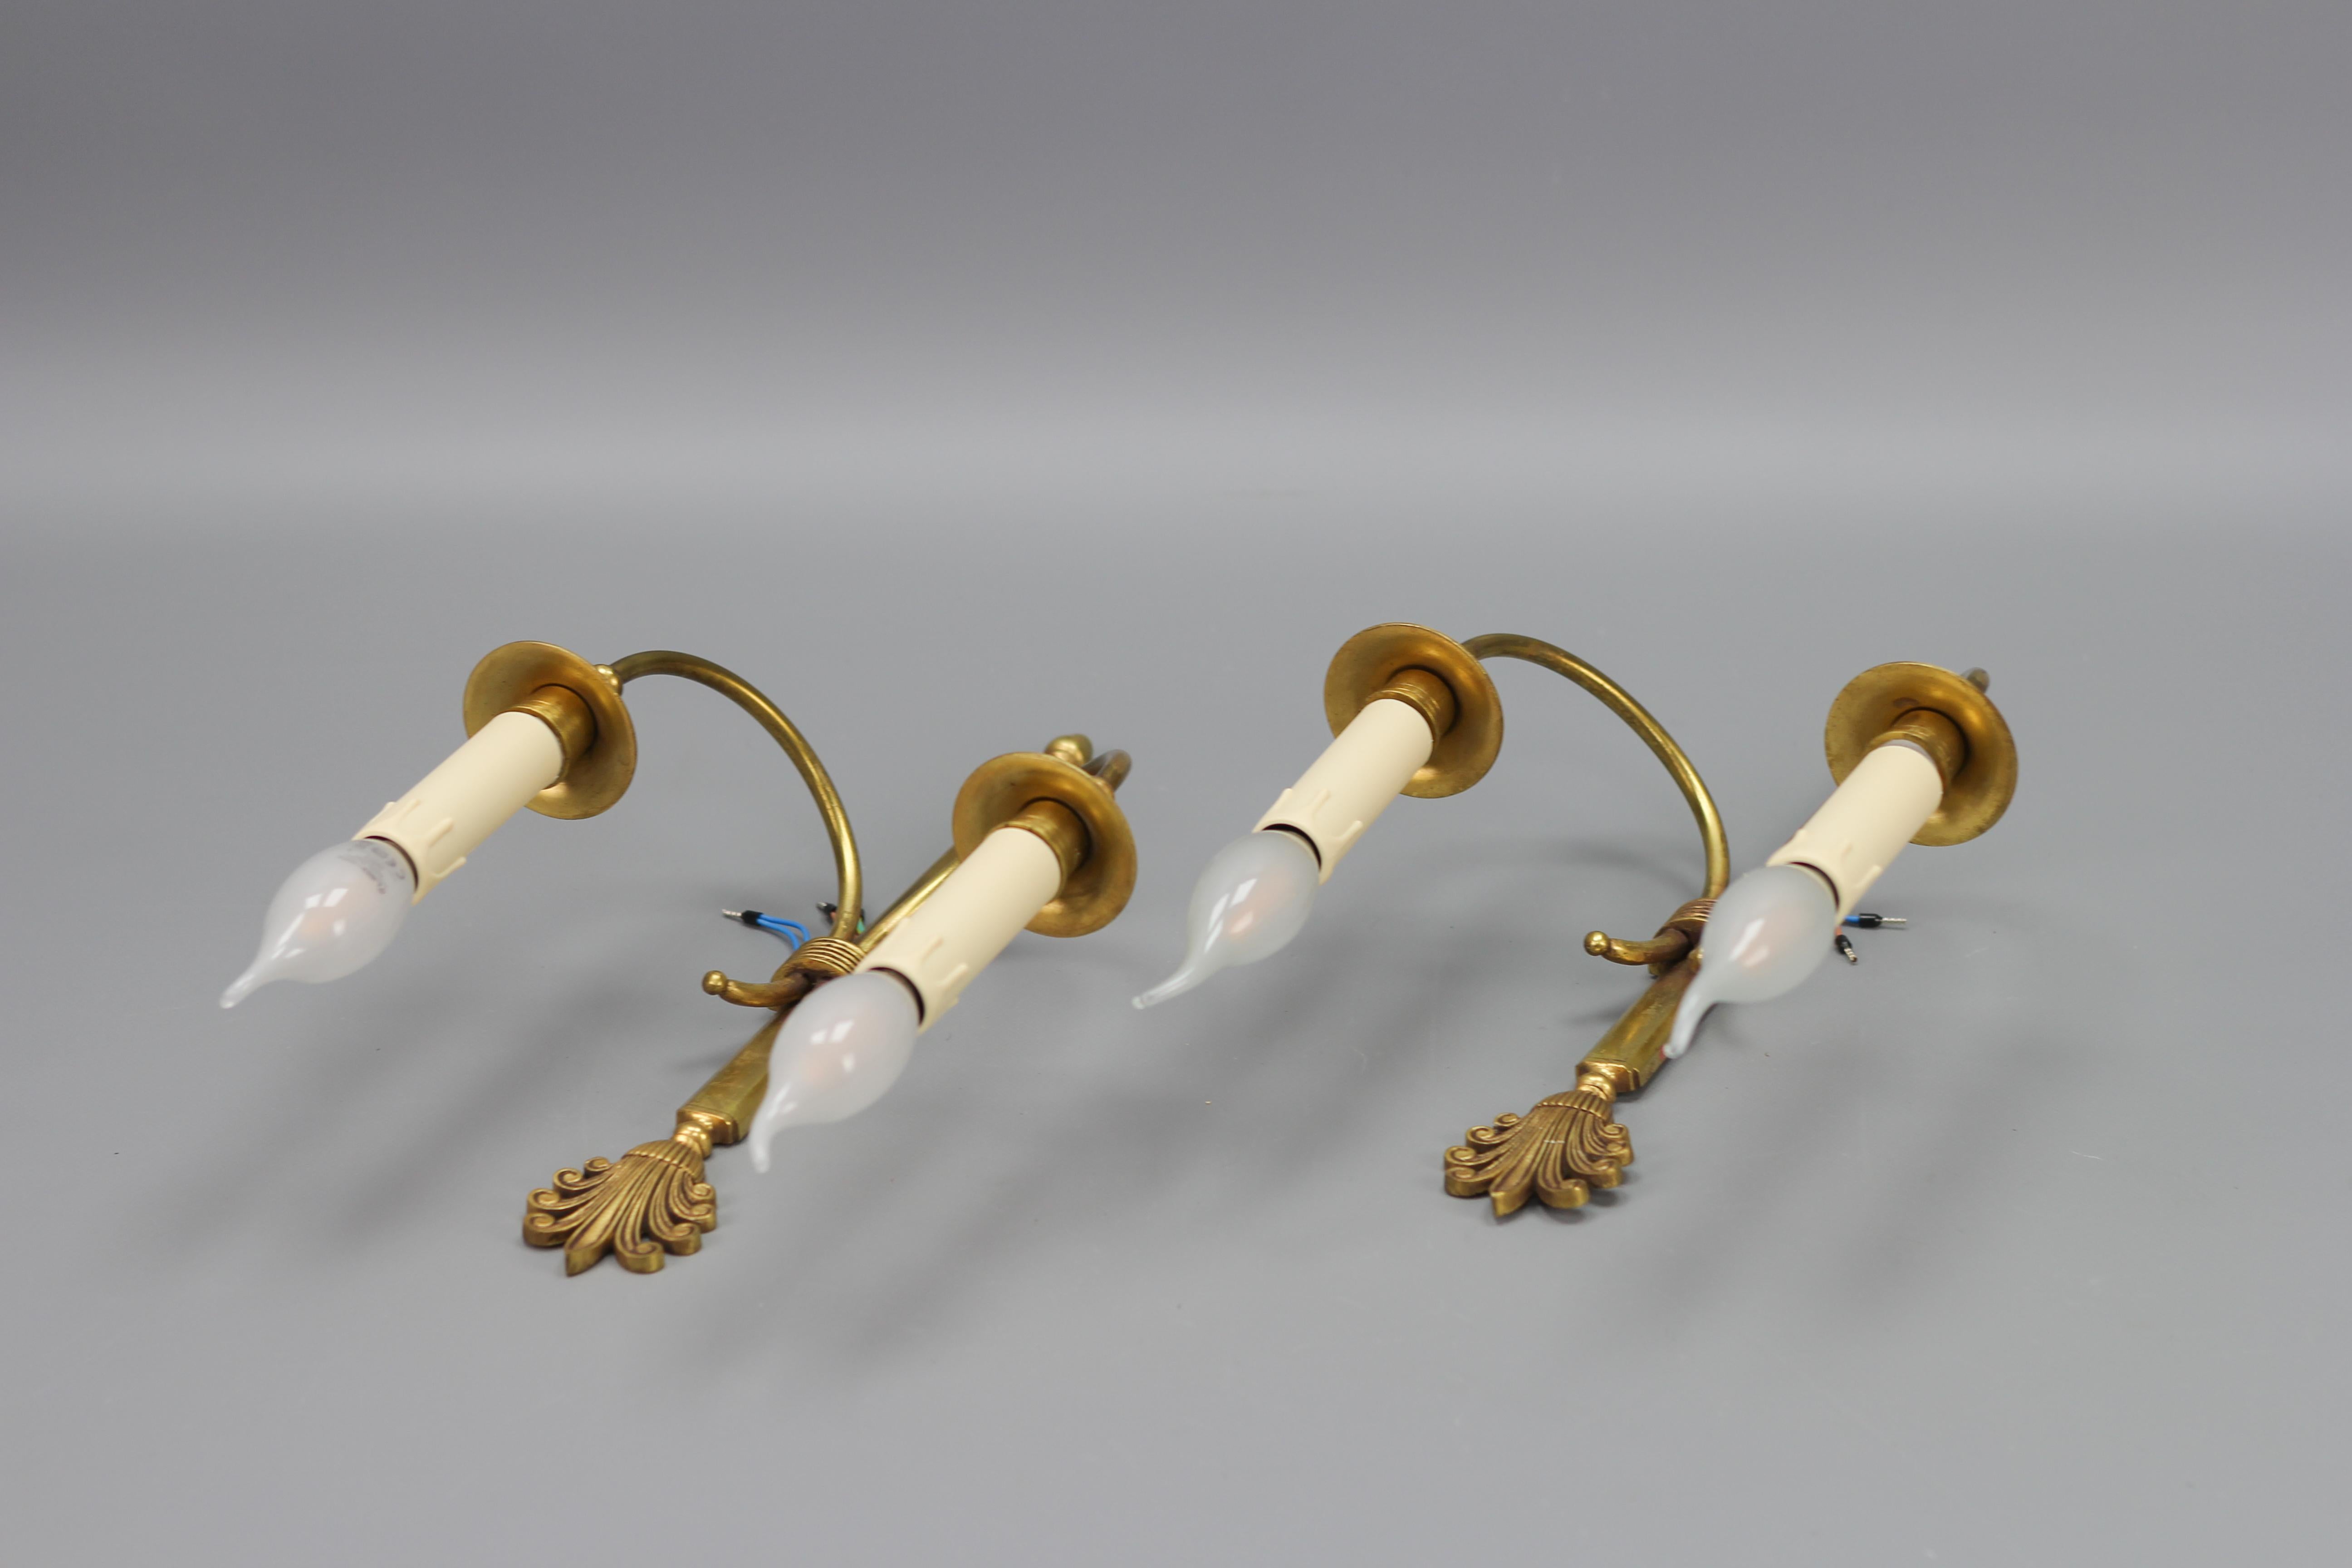 French Art Deco Brass Twin Arm Sconces, a Pair, ca. 1930 For Sale 6